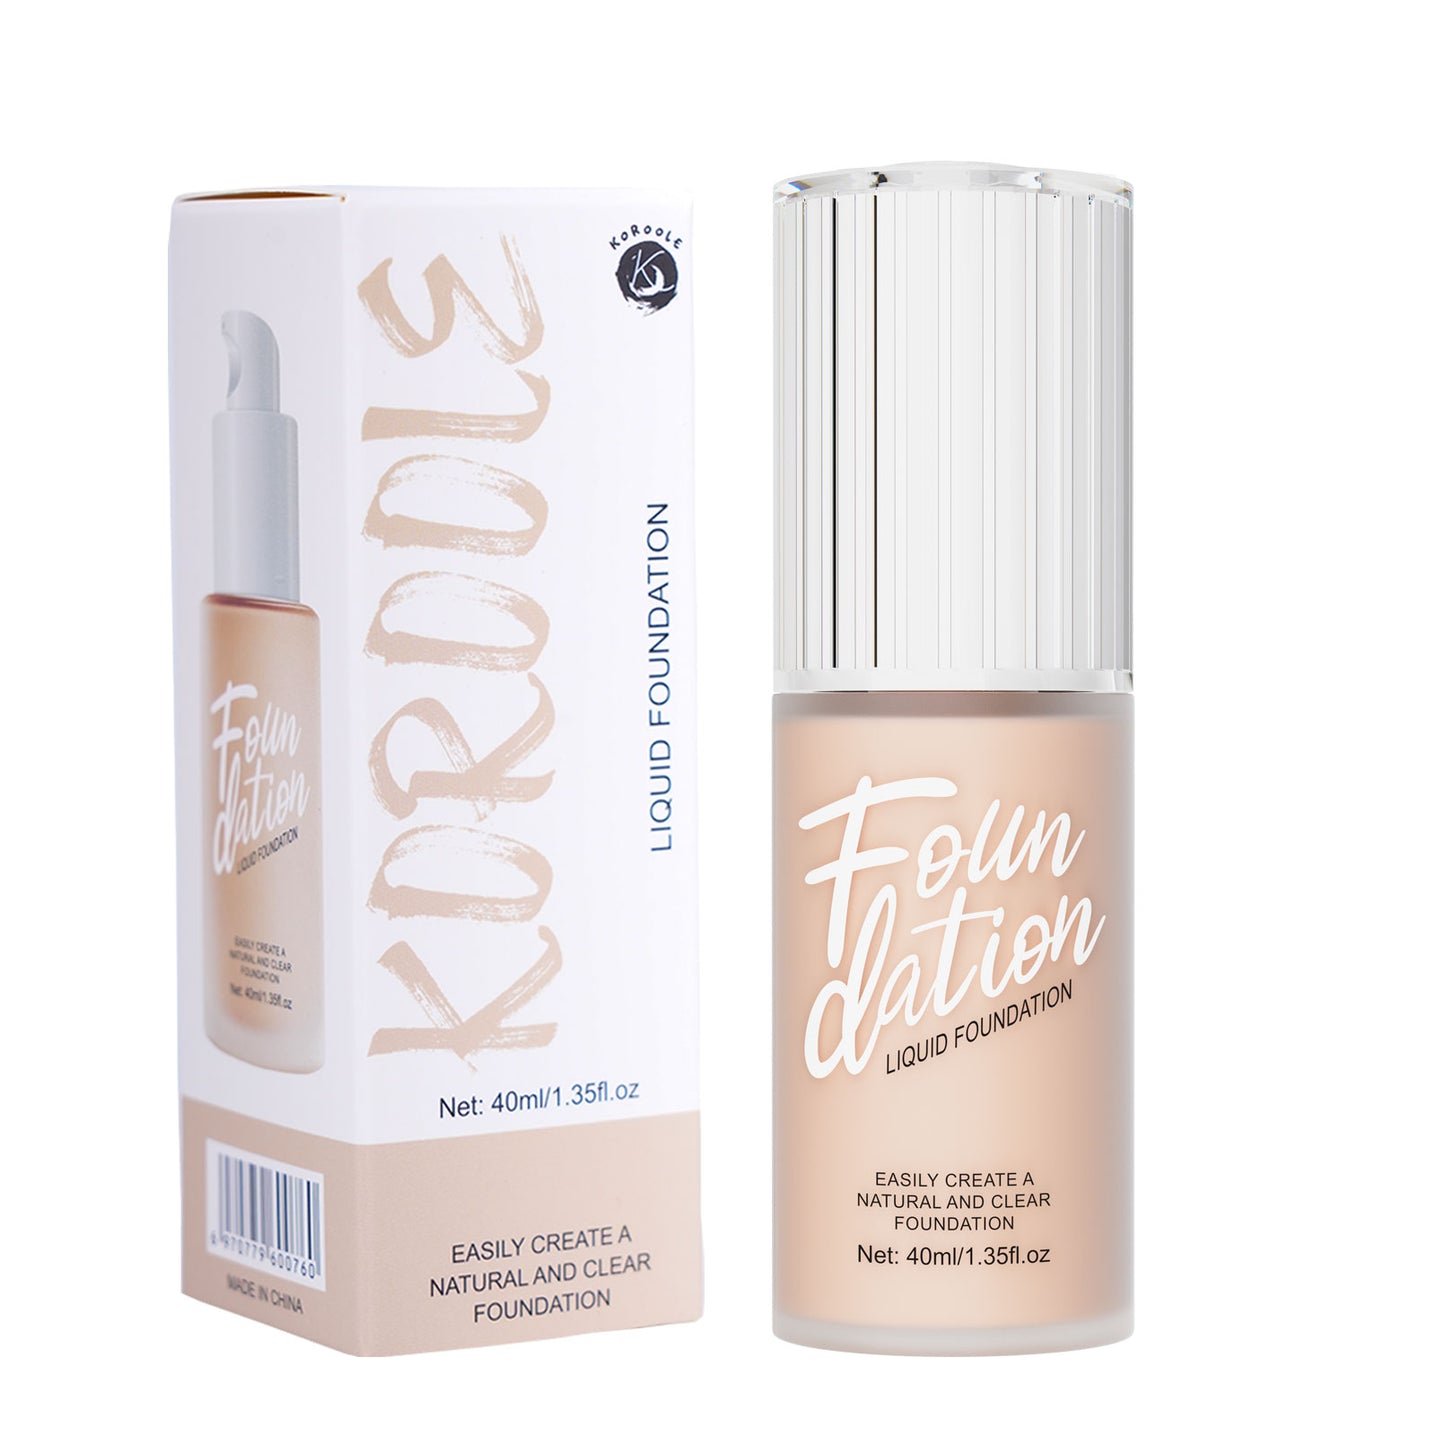 Koroole 40ML Liquid Foundation Natural And Clear Foundation Powder Free Base Makeup